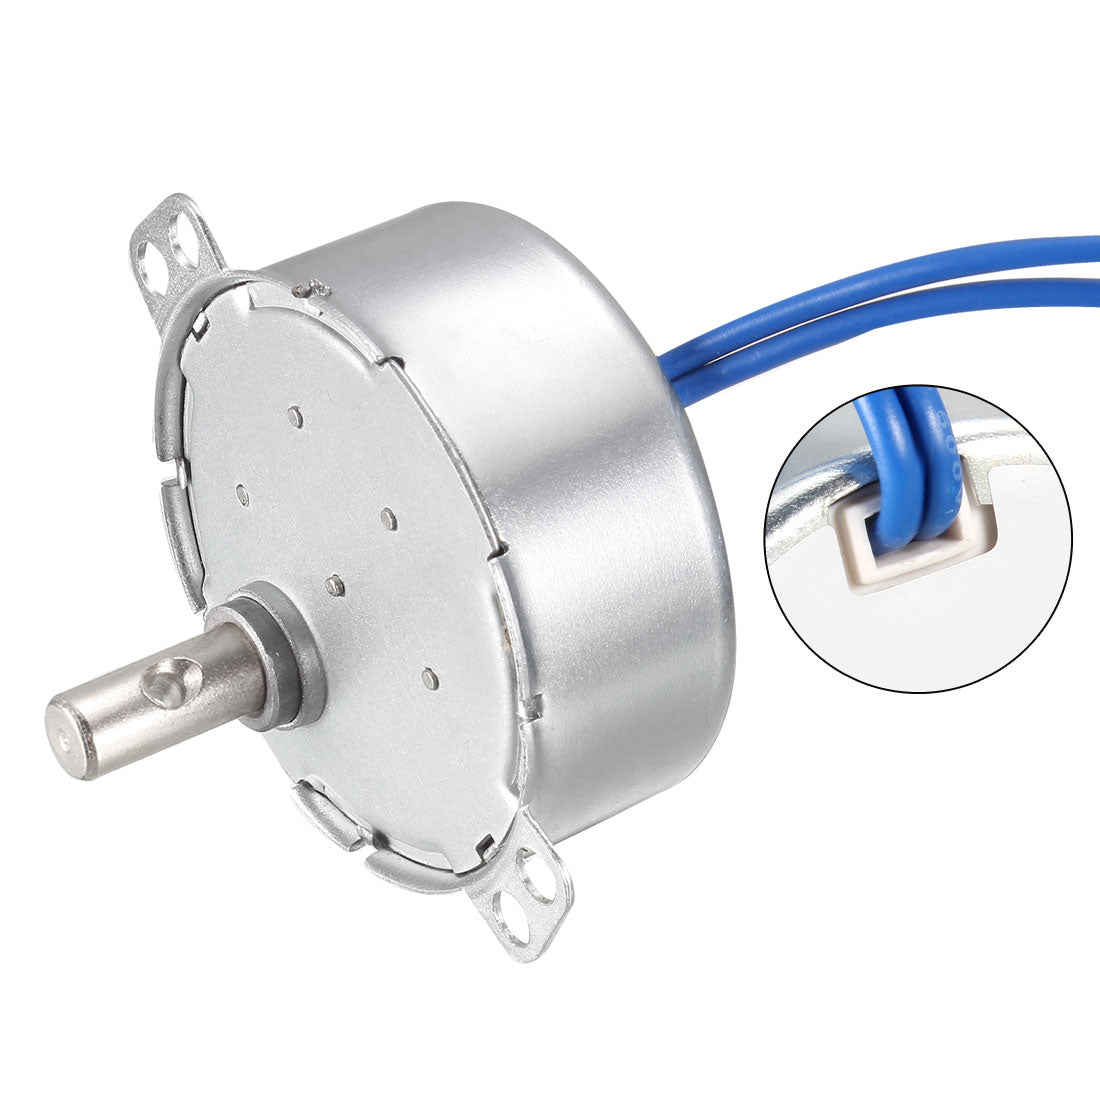 Uxcell Uxcell Metal Gear Electric Synchronous Motor AC 100-127V 1.3-1.5RPM 50-60Hz CCW/CW 4W